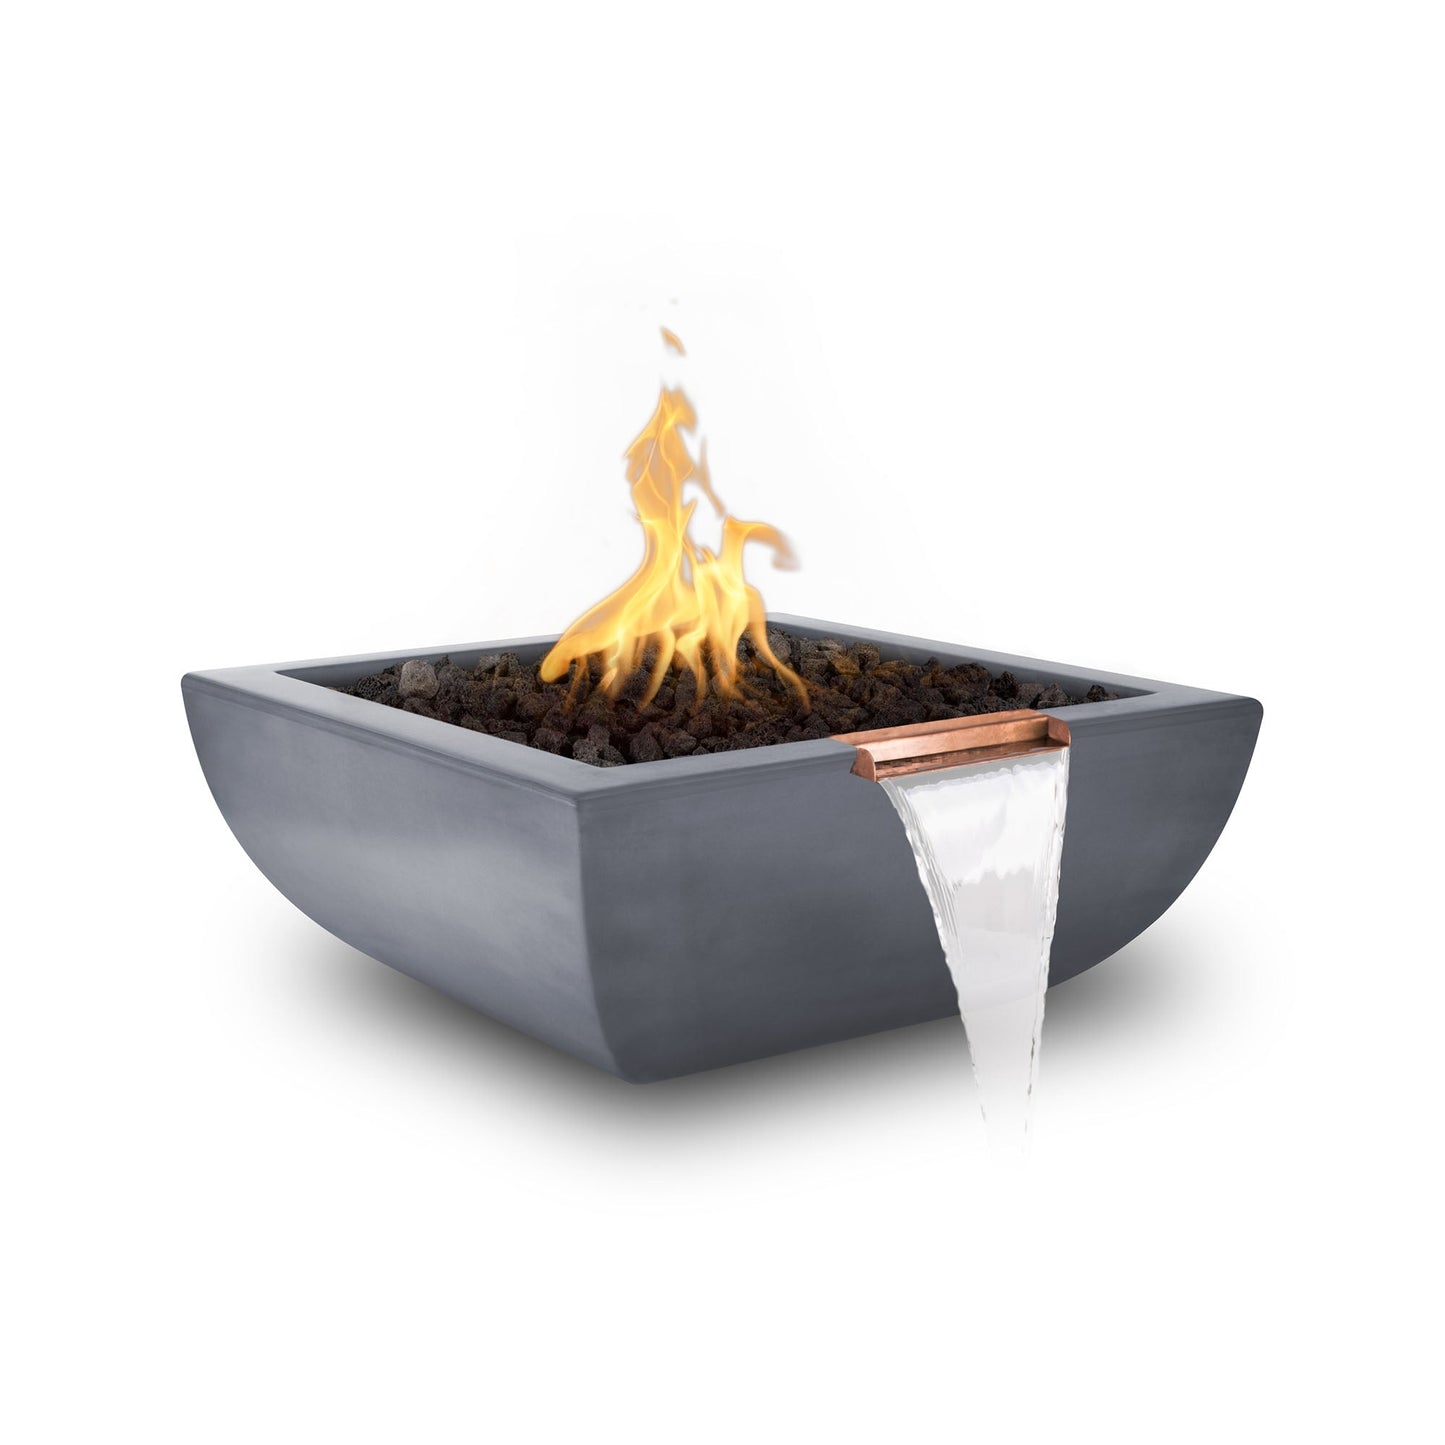 The Outdoor Plus Square Avalon 36" Metallic Silver GFRC Concrete Natural Gas Fire & Water Bowl with Match Lit with Flame Sense Ignition